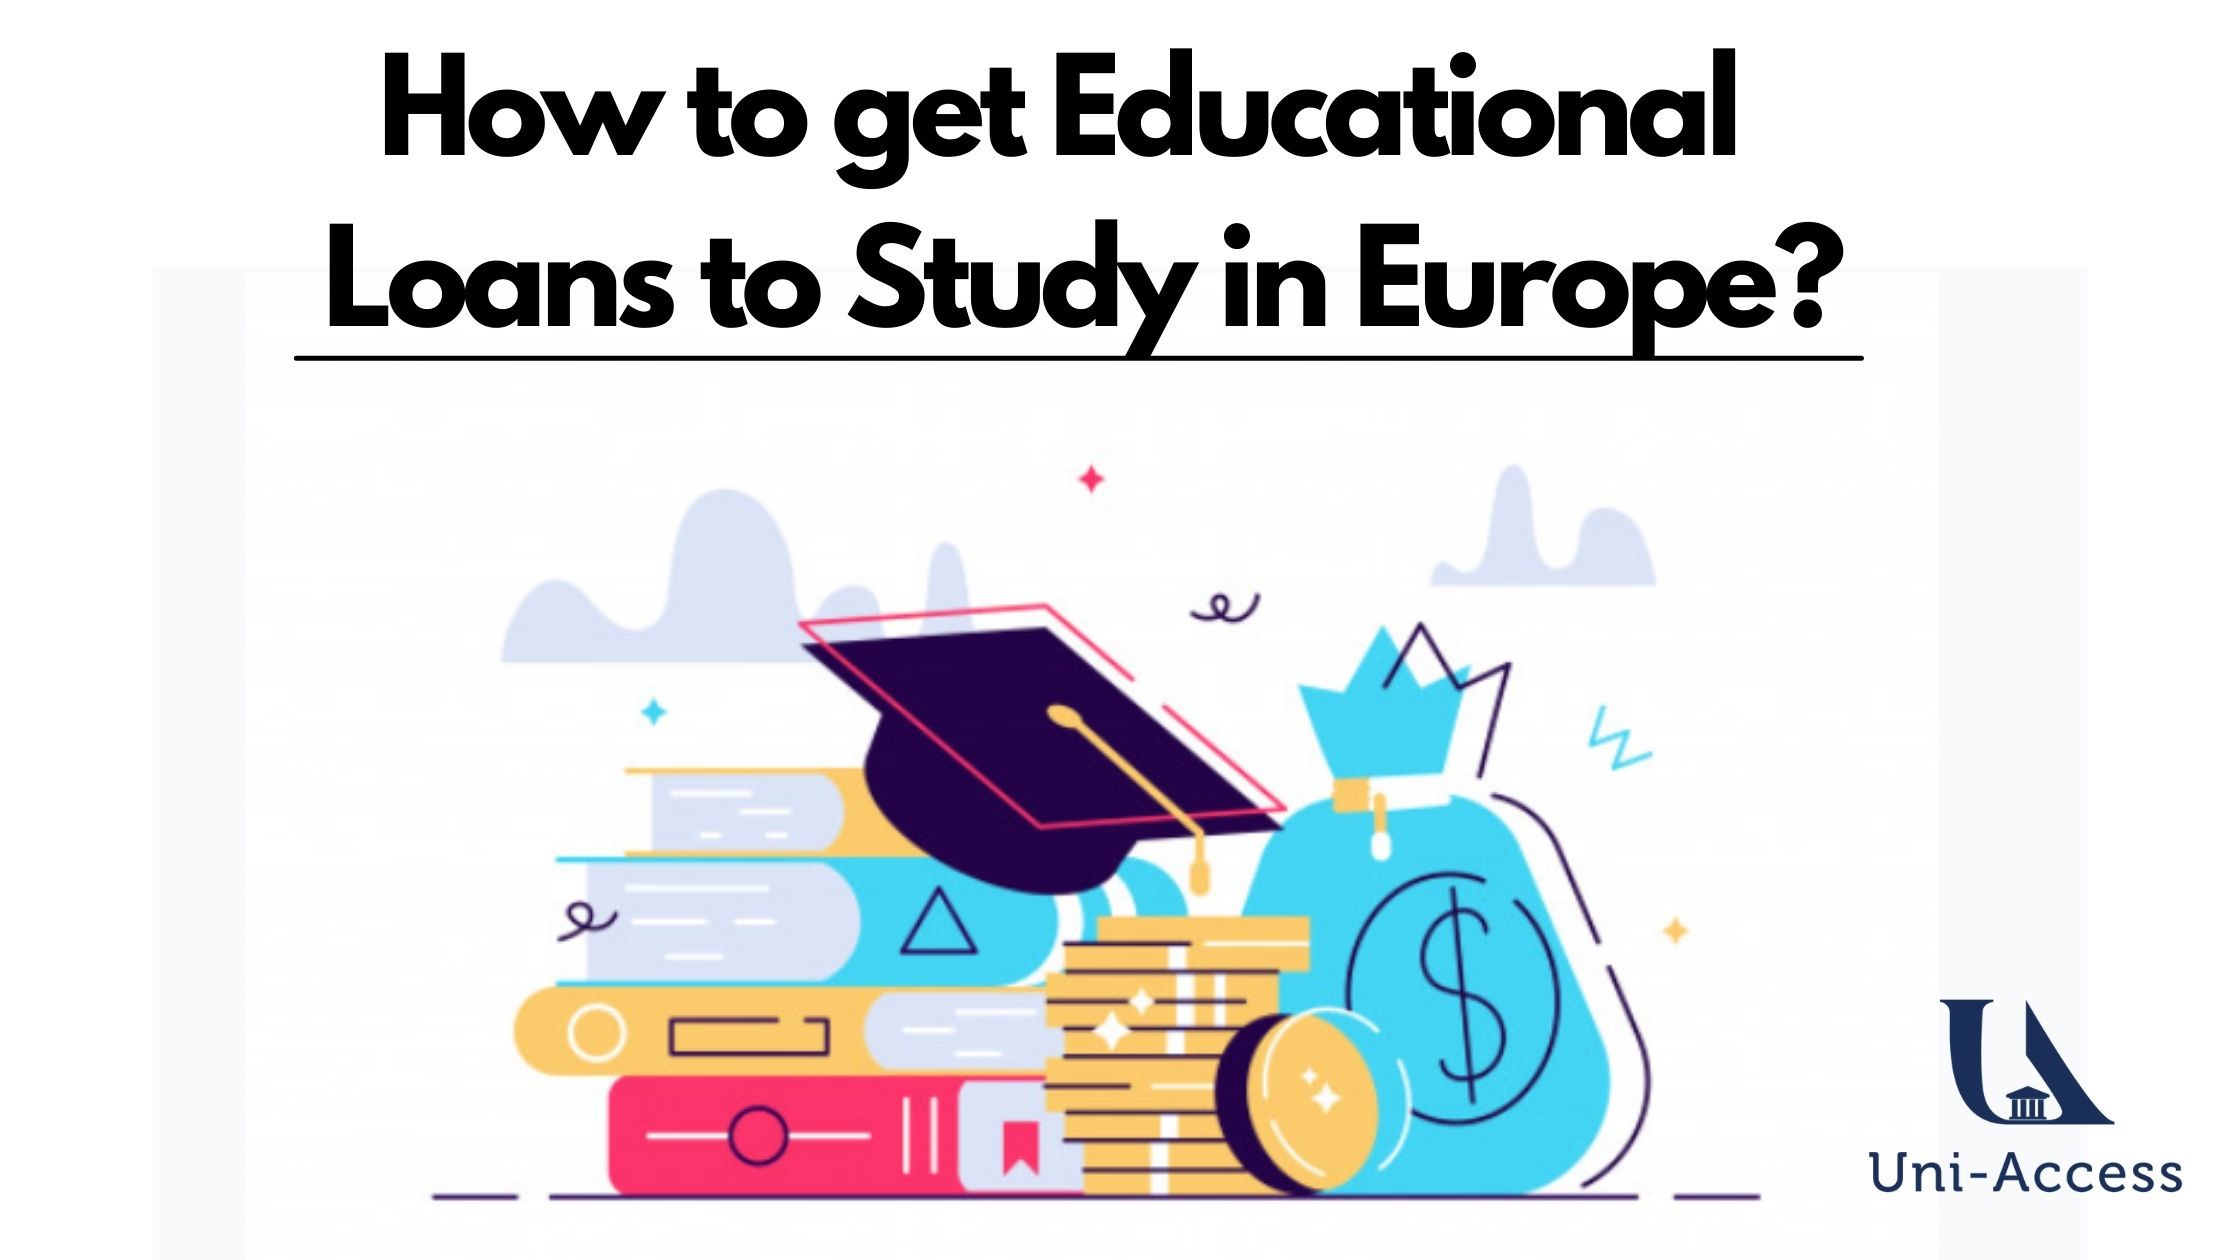 How to get Educational Loans to Study in Europe